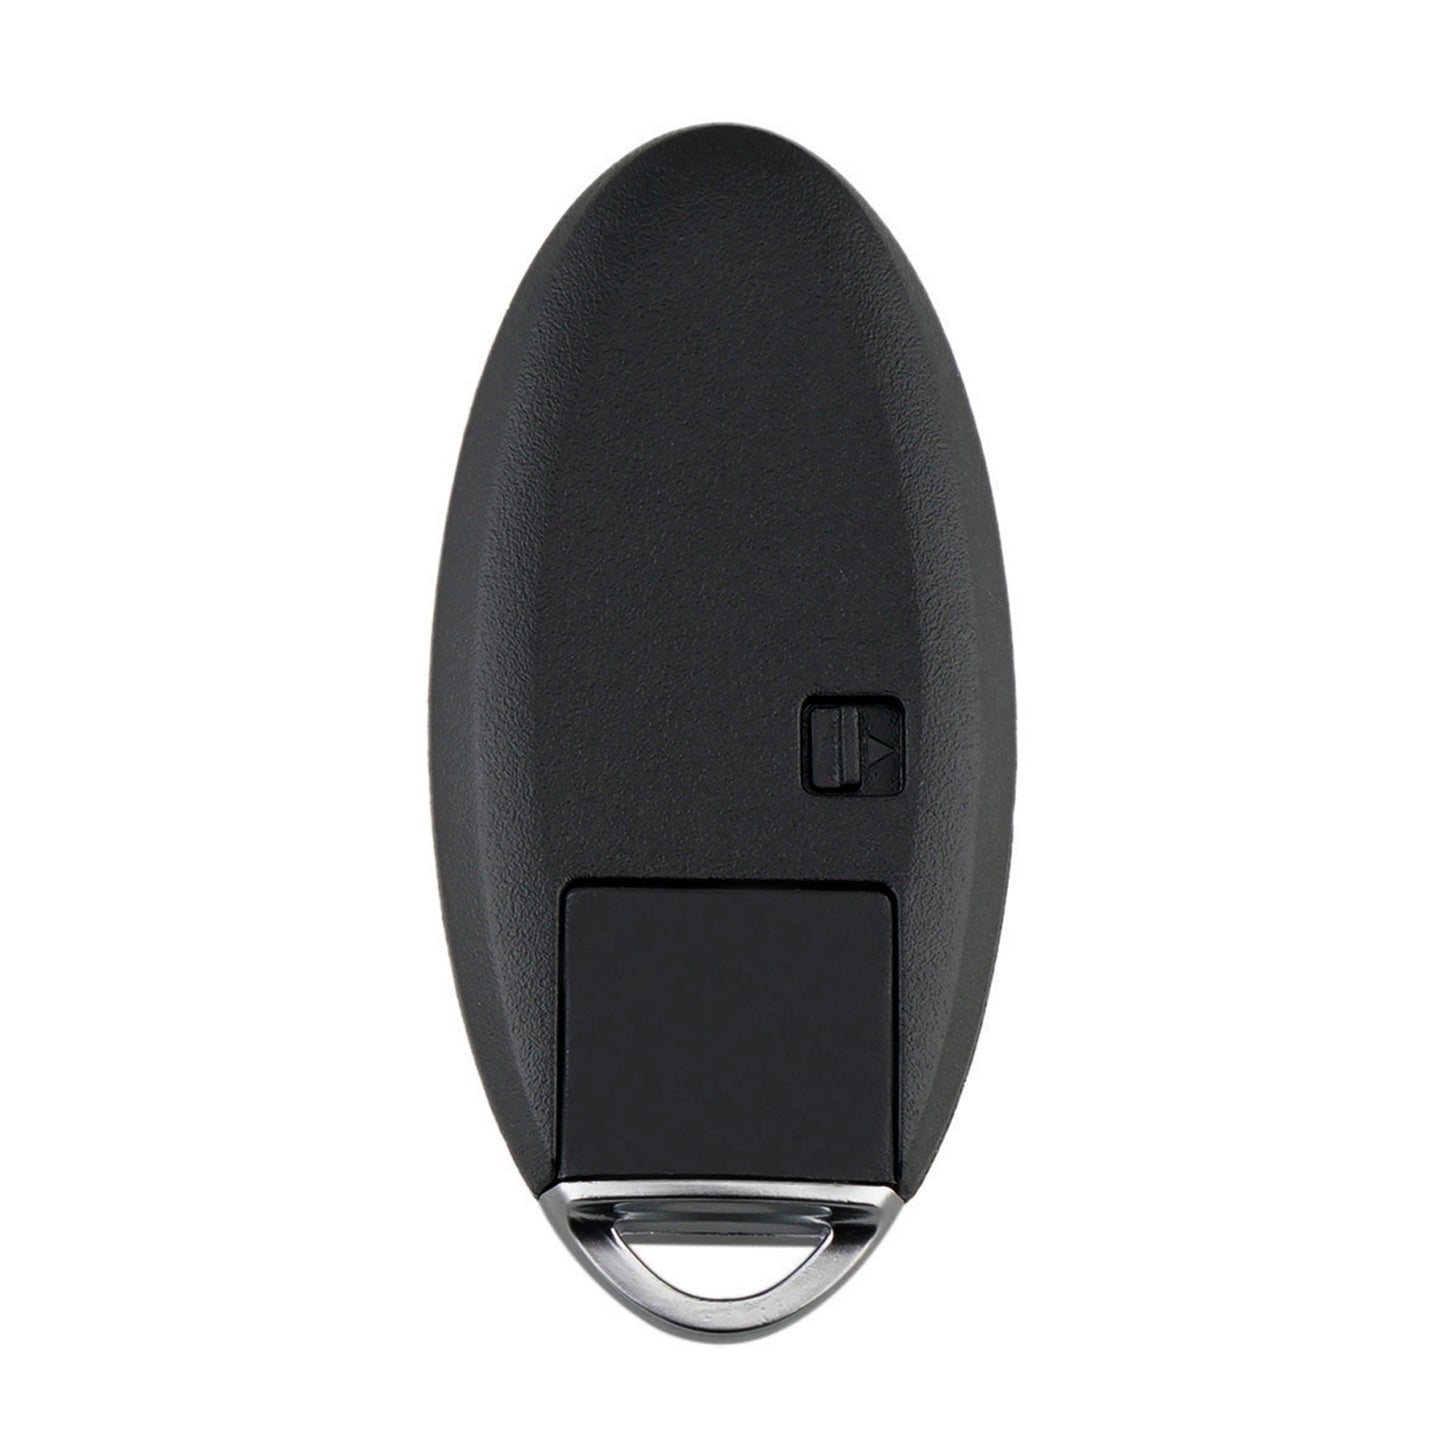 5 Buttons 433MHz Keyless Entry Fob Remote Car Key For 2015-2018 Nissan Murano (Platinum Edition) SL Pathfinder (2016 year must match PN, IC & FCC number, split year) FCC ID: KR5S180144014 SKU : J323